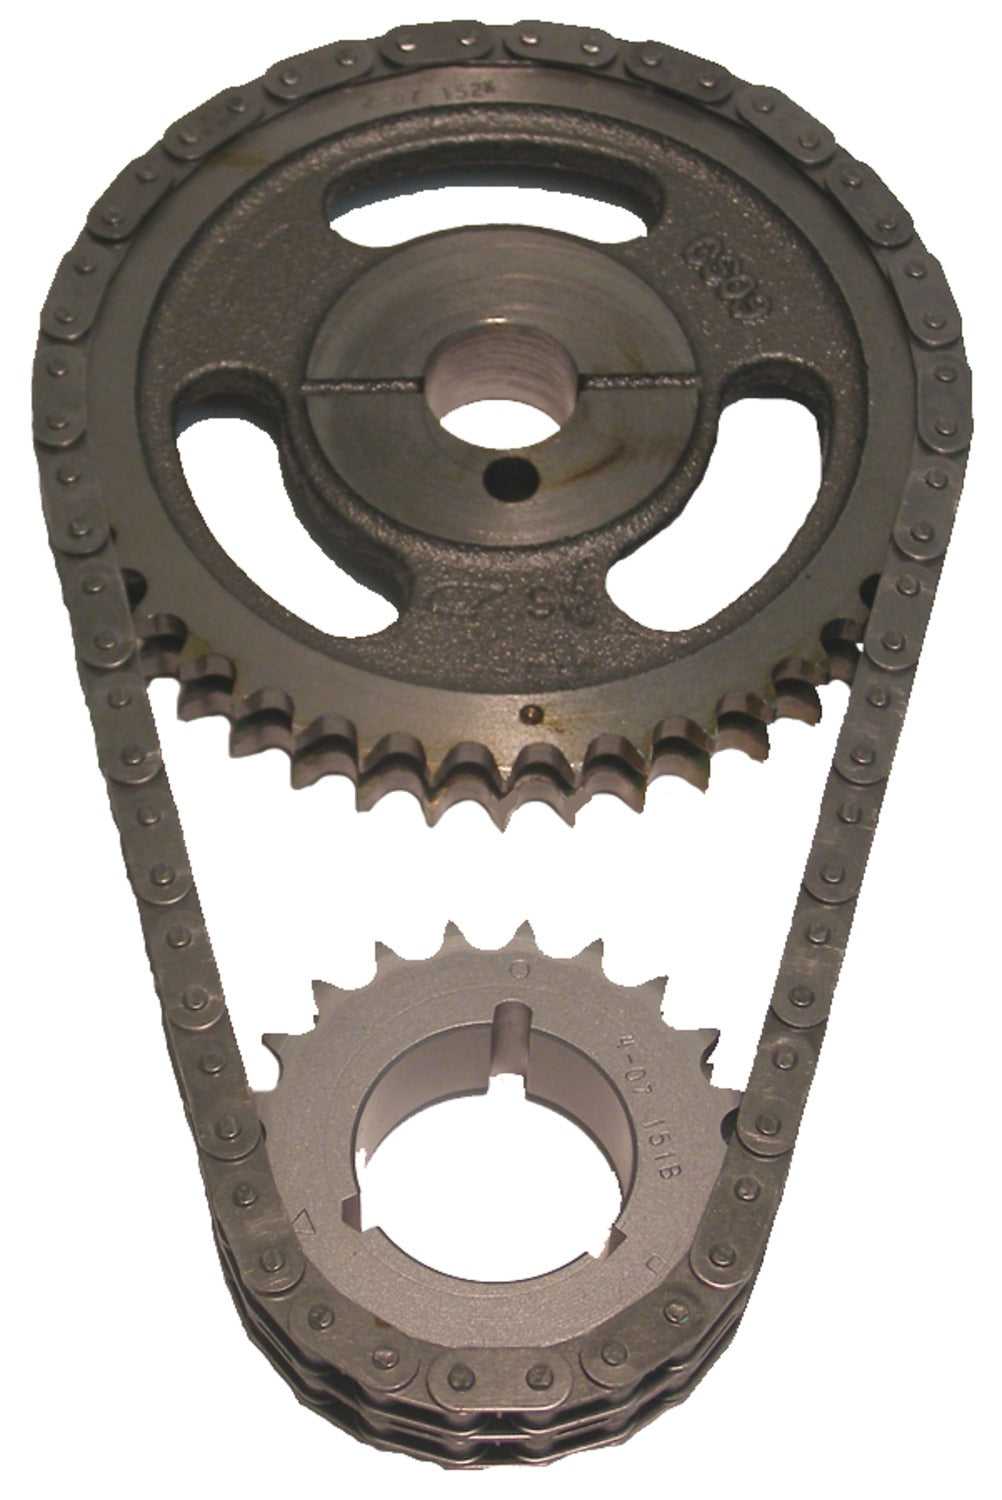 9-1135 Cloyes Performance Timing Gear Set Chain Drive